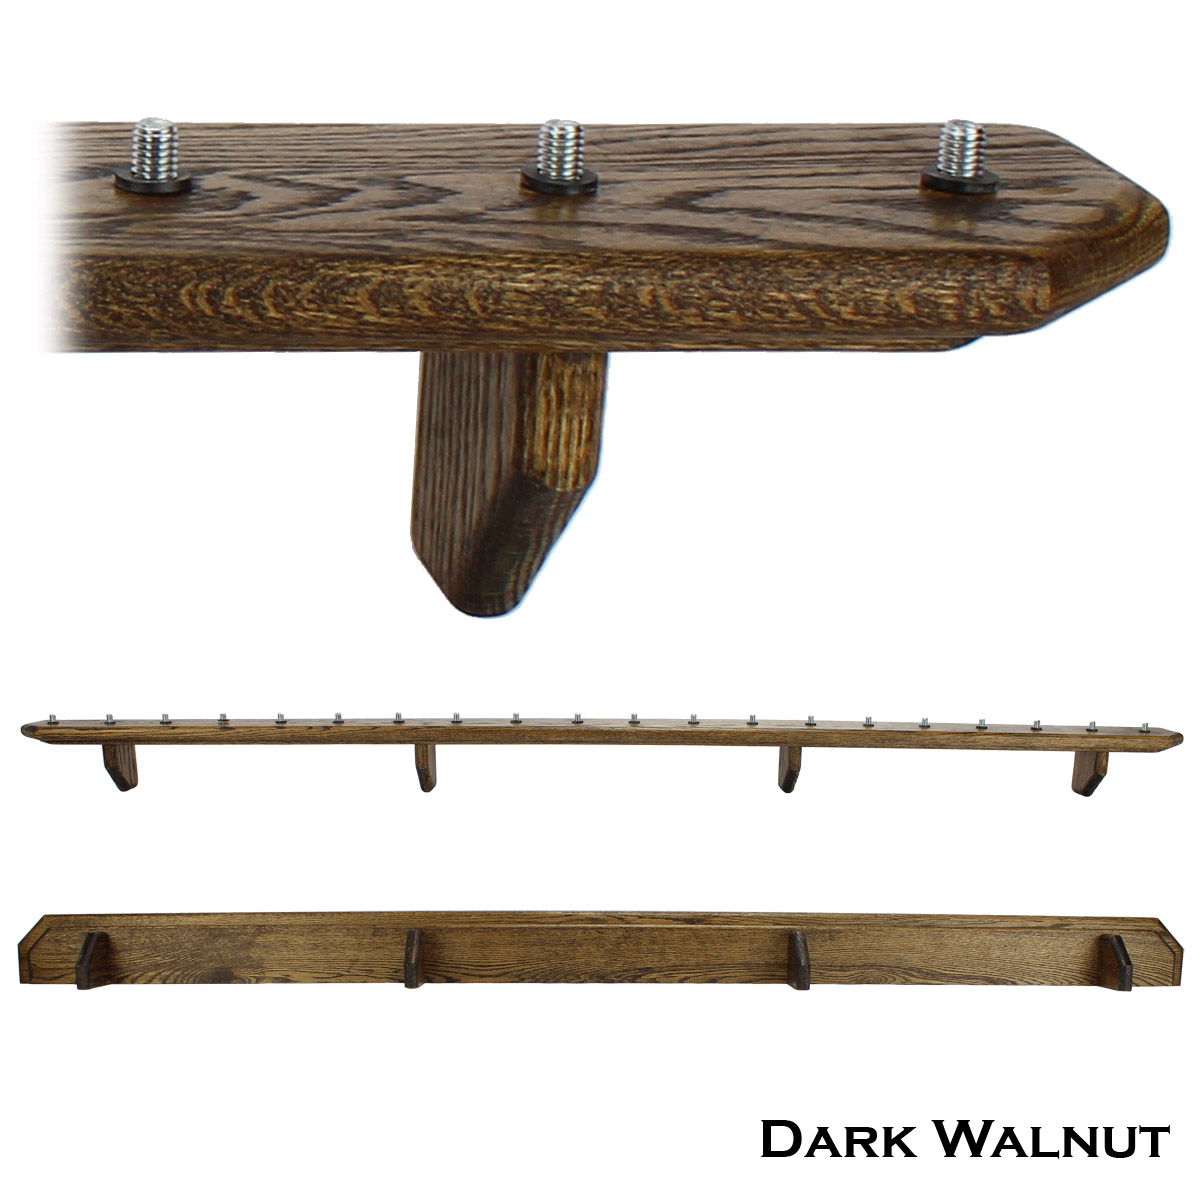 Details about   SOLID WALNUT BEER TAP HANDLE DISPLAY HOLDS 5 WALL MOUNTED 